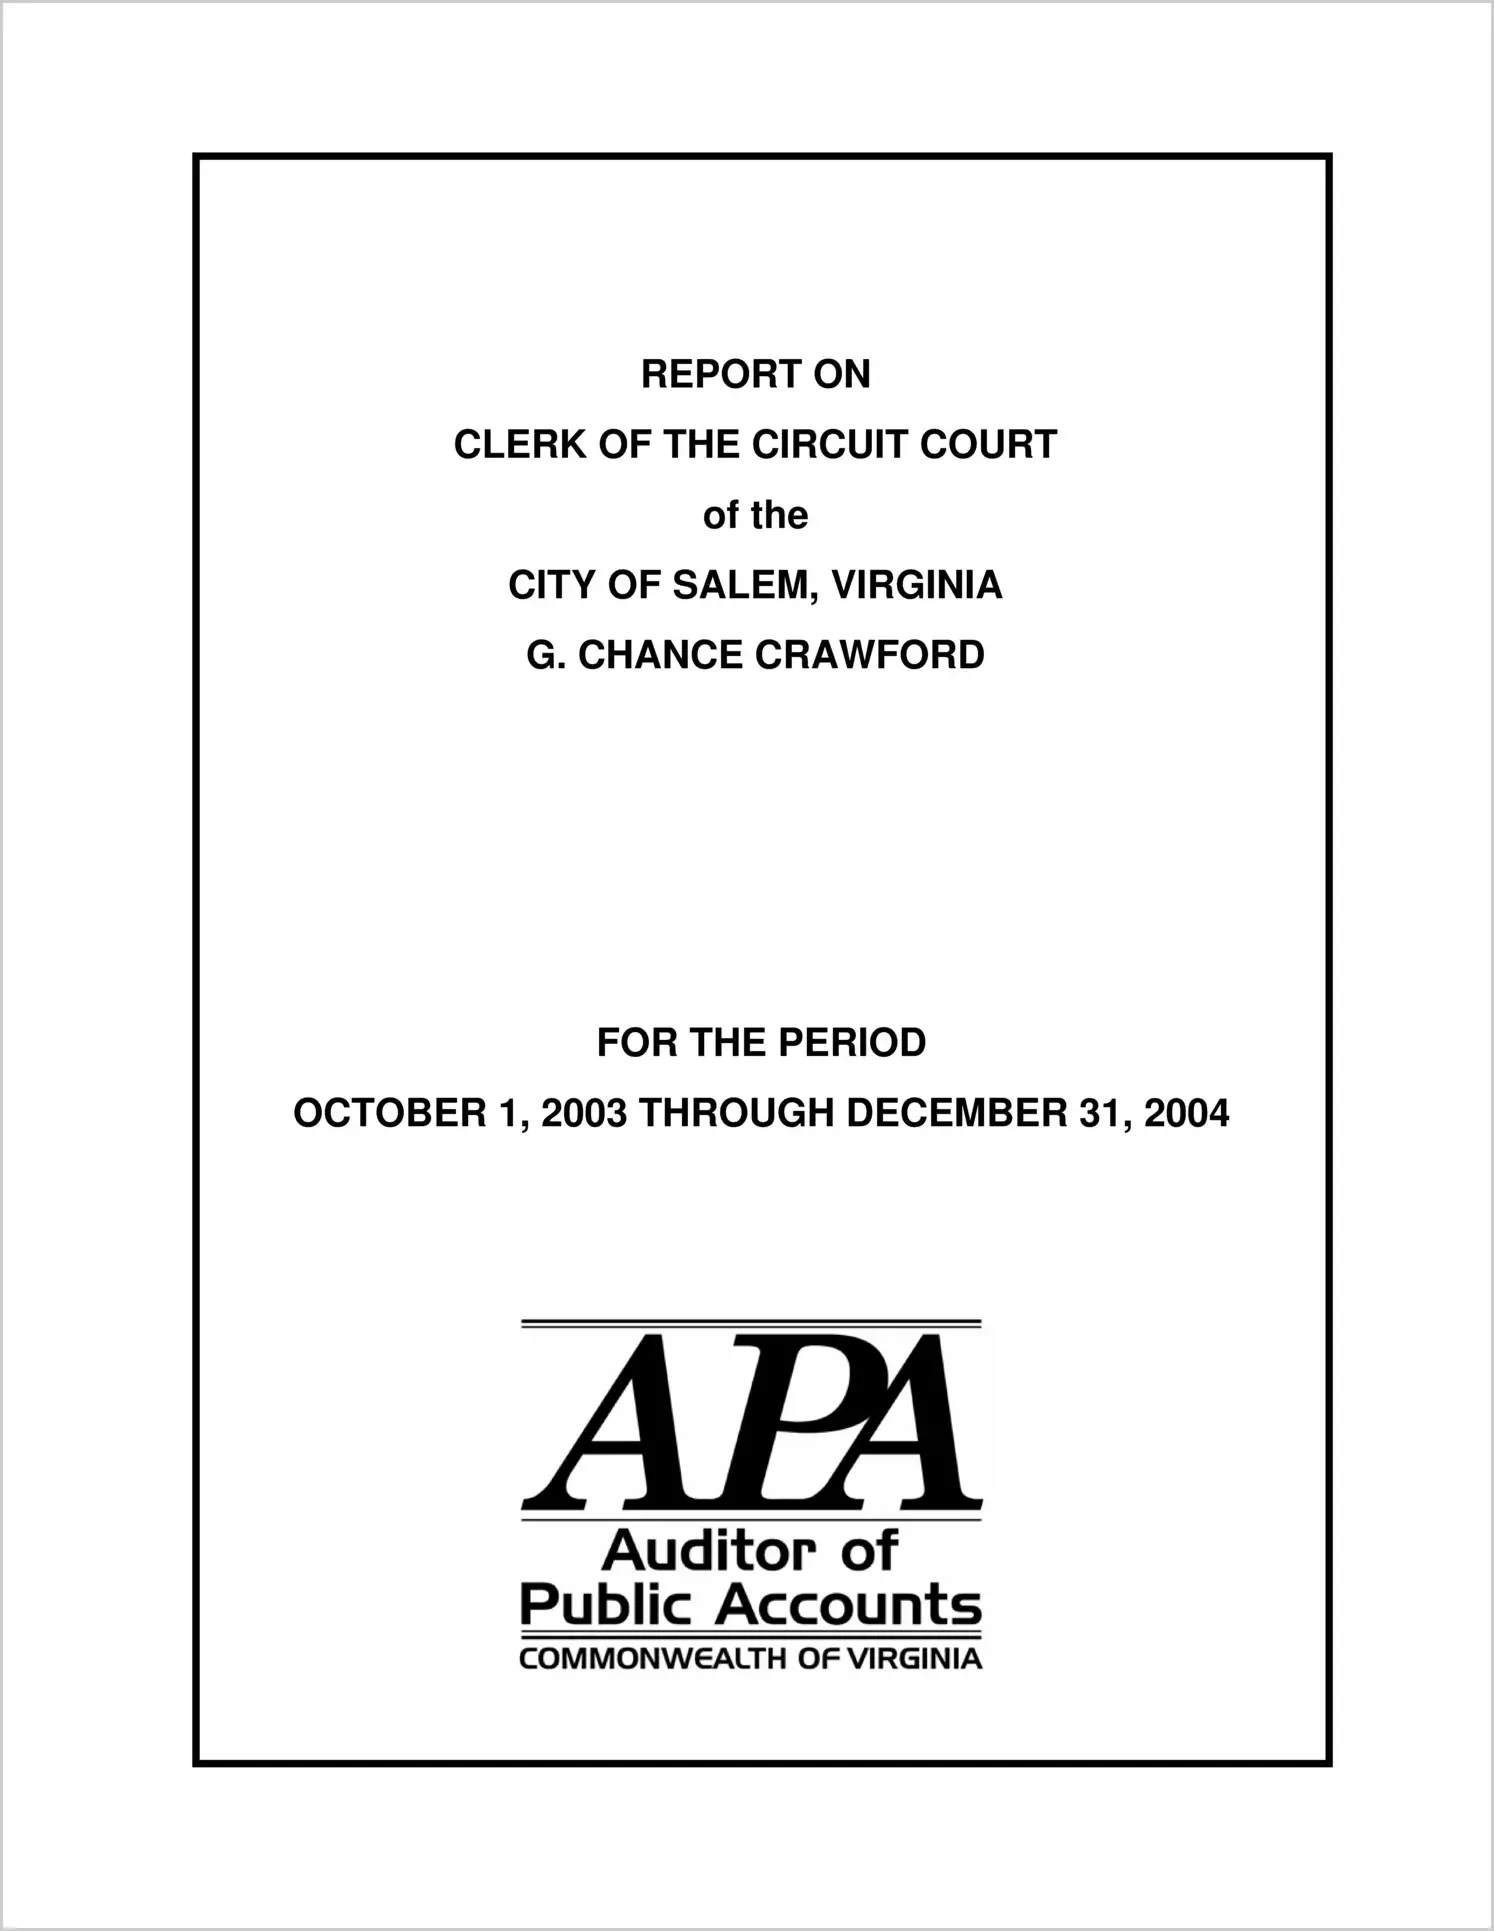 Clerk of the Circuit Court of the City of Salem for the period October 1, 2003 through December 31, 2004